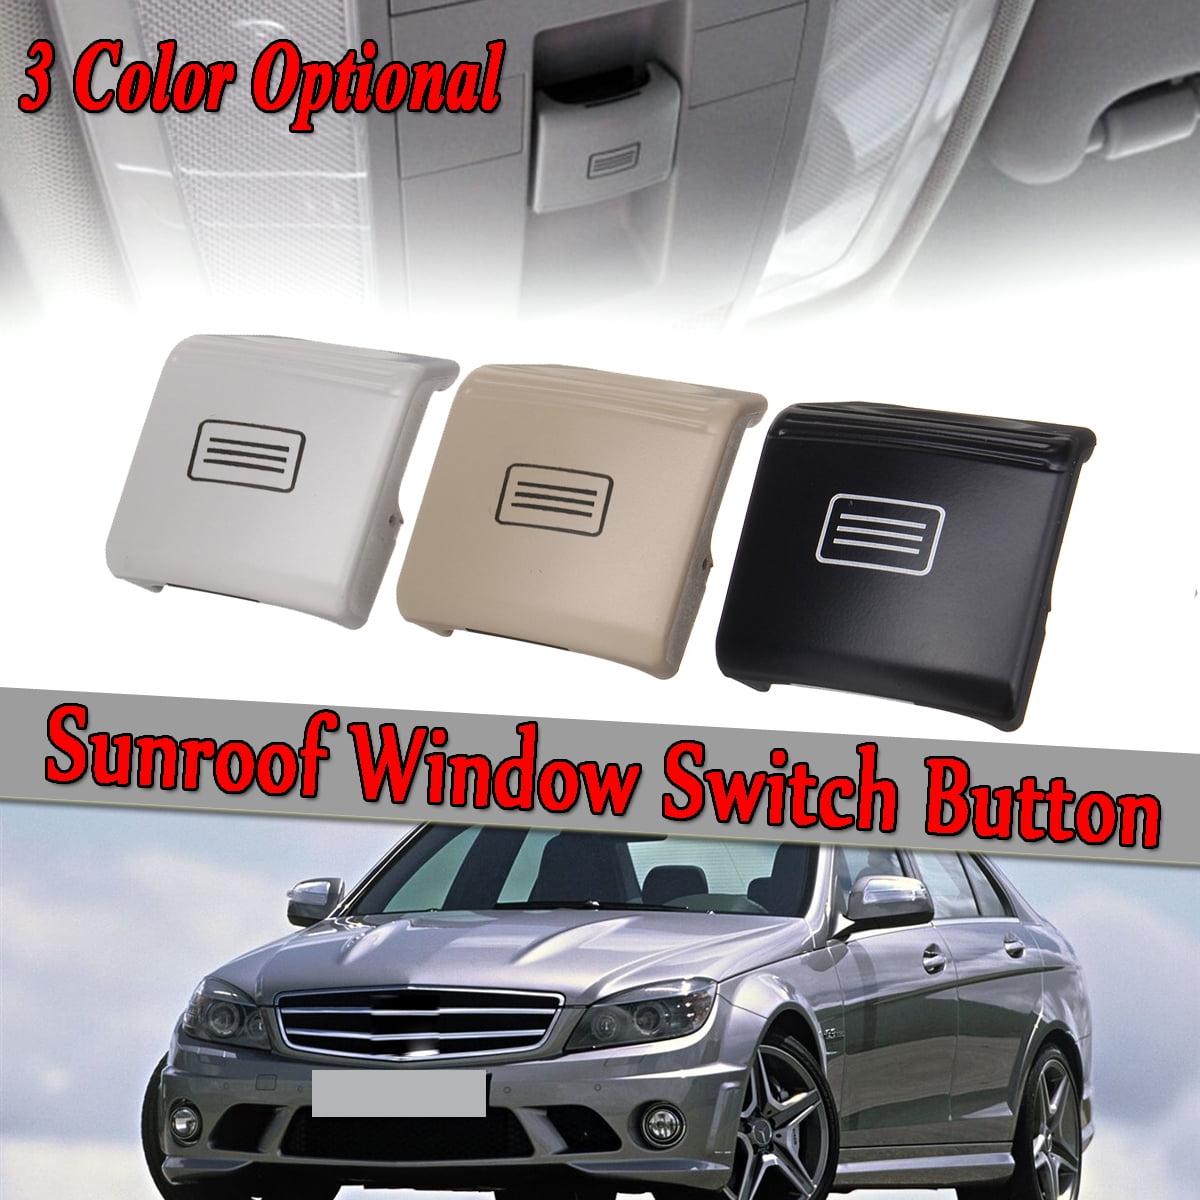 Car Sunroof Window Switch Button Cover Fit for Mercedes-Benz S-Class Car Styling Black 